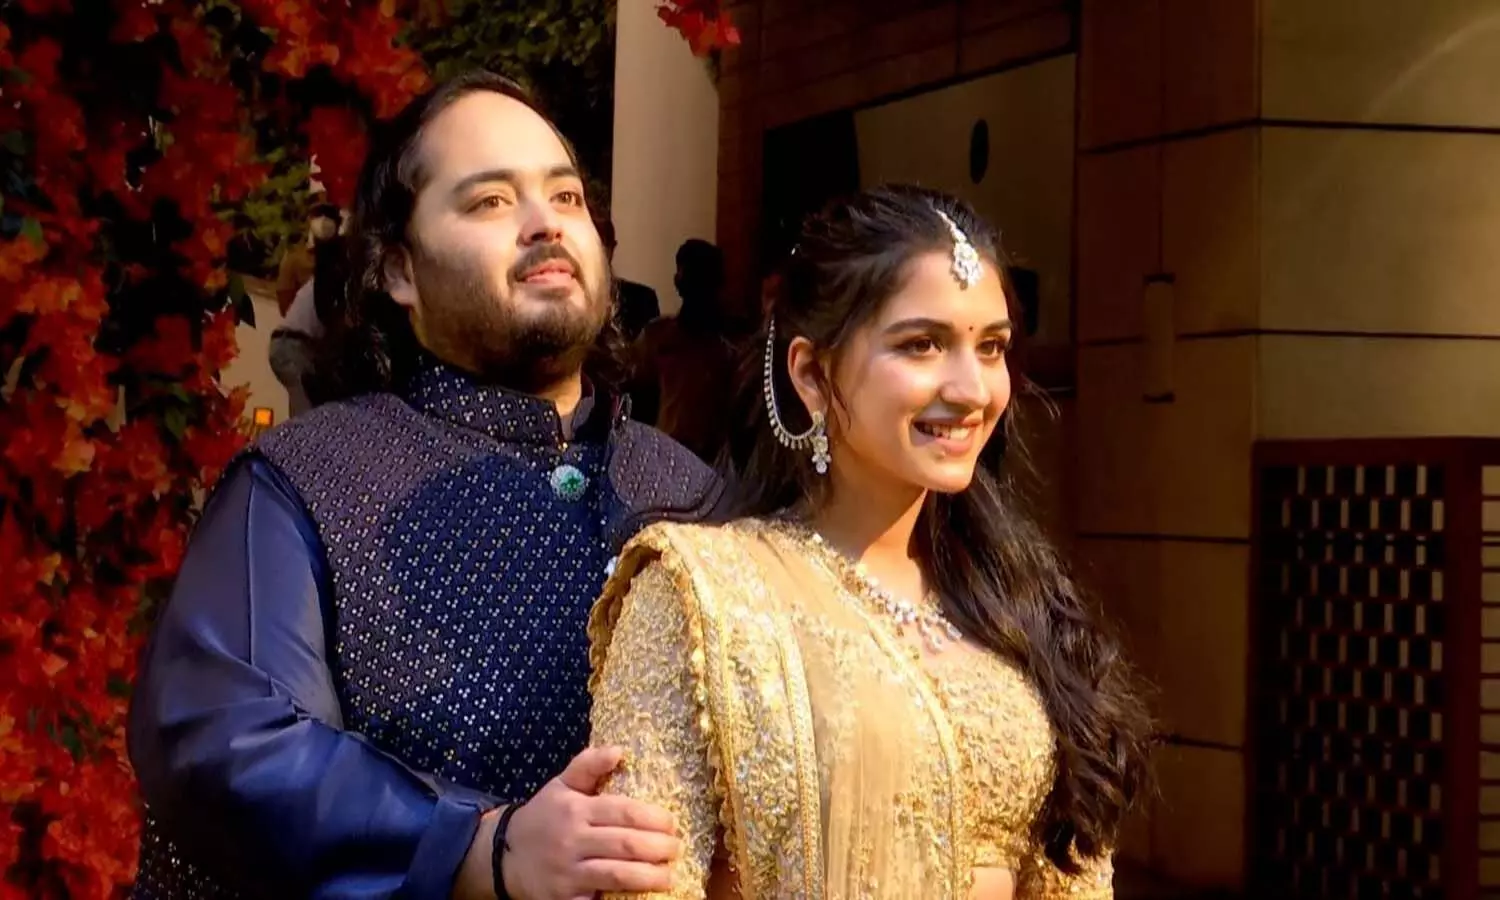 Anant and Radhika got engaged amid traditional rituals, both of them exchanged rings